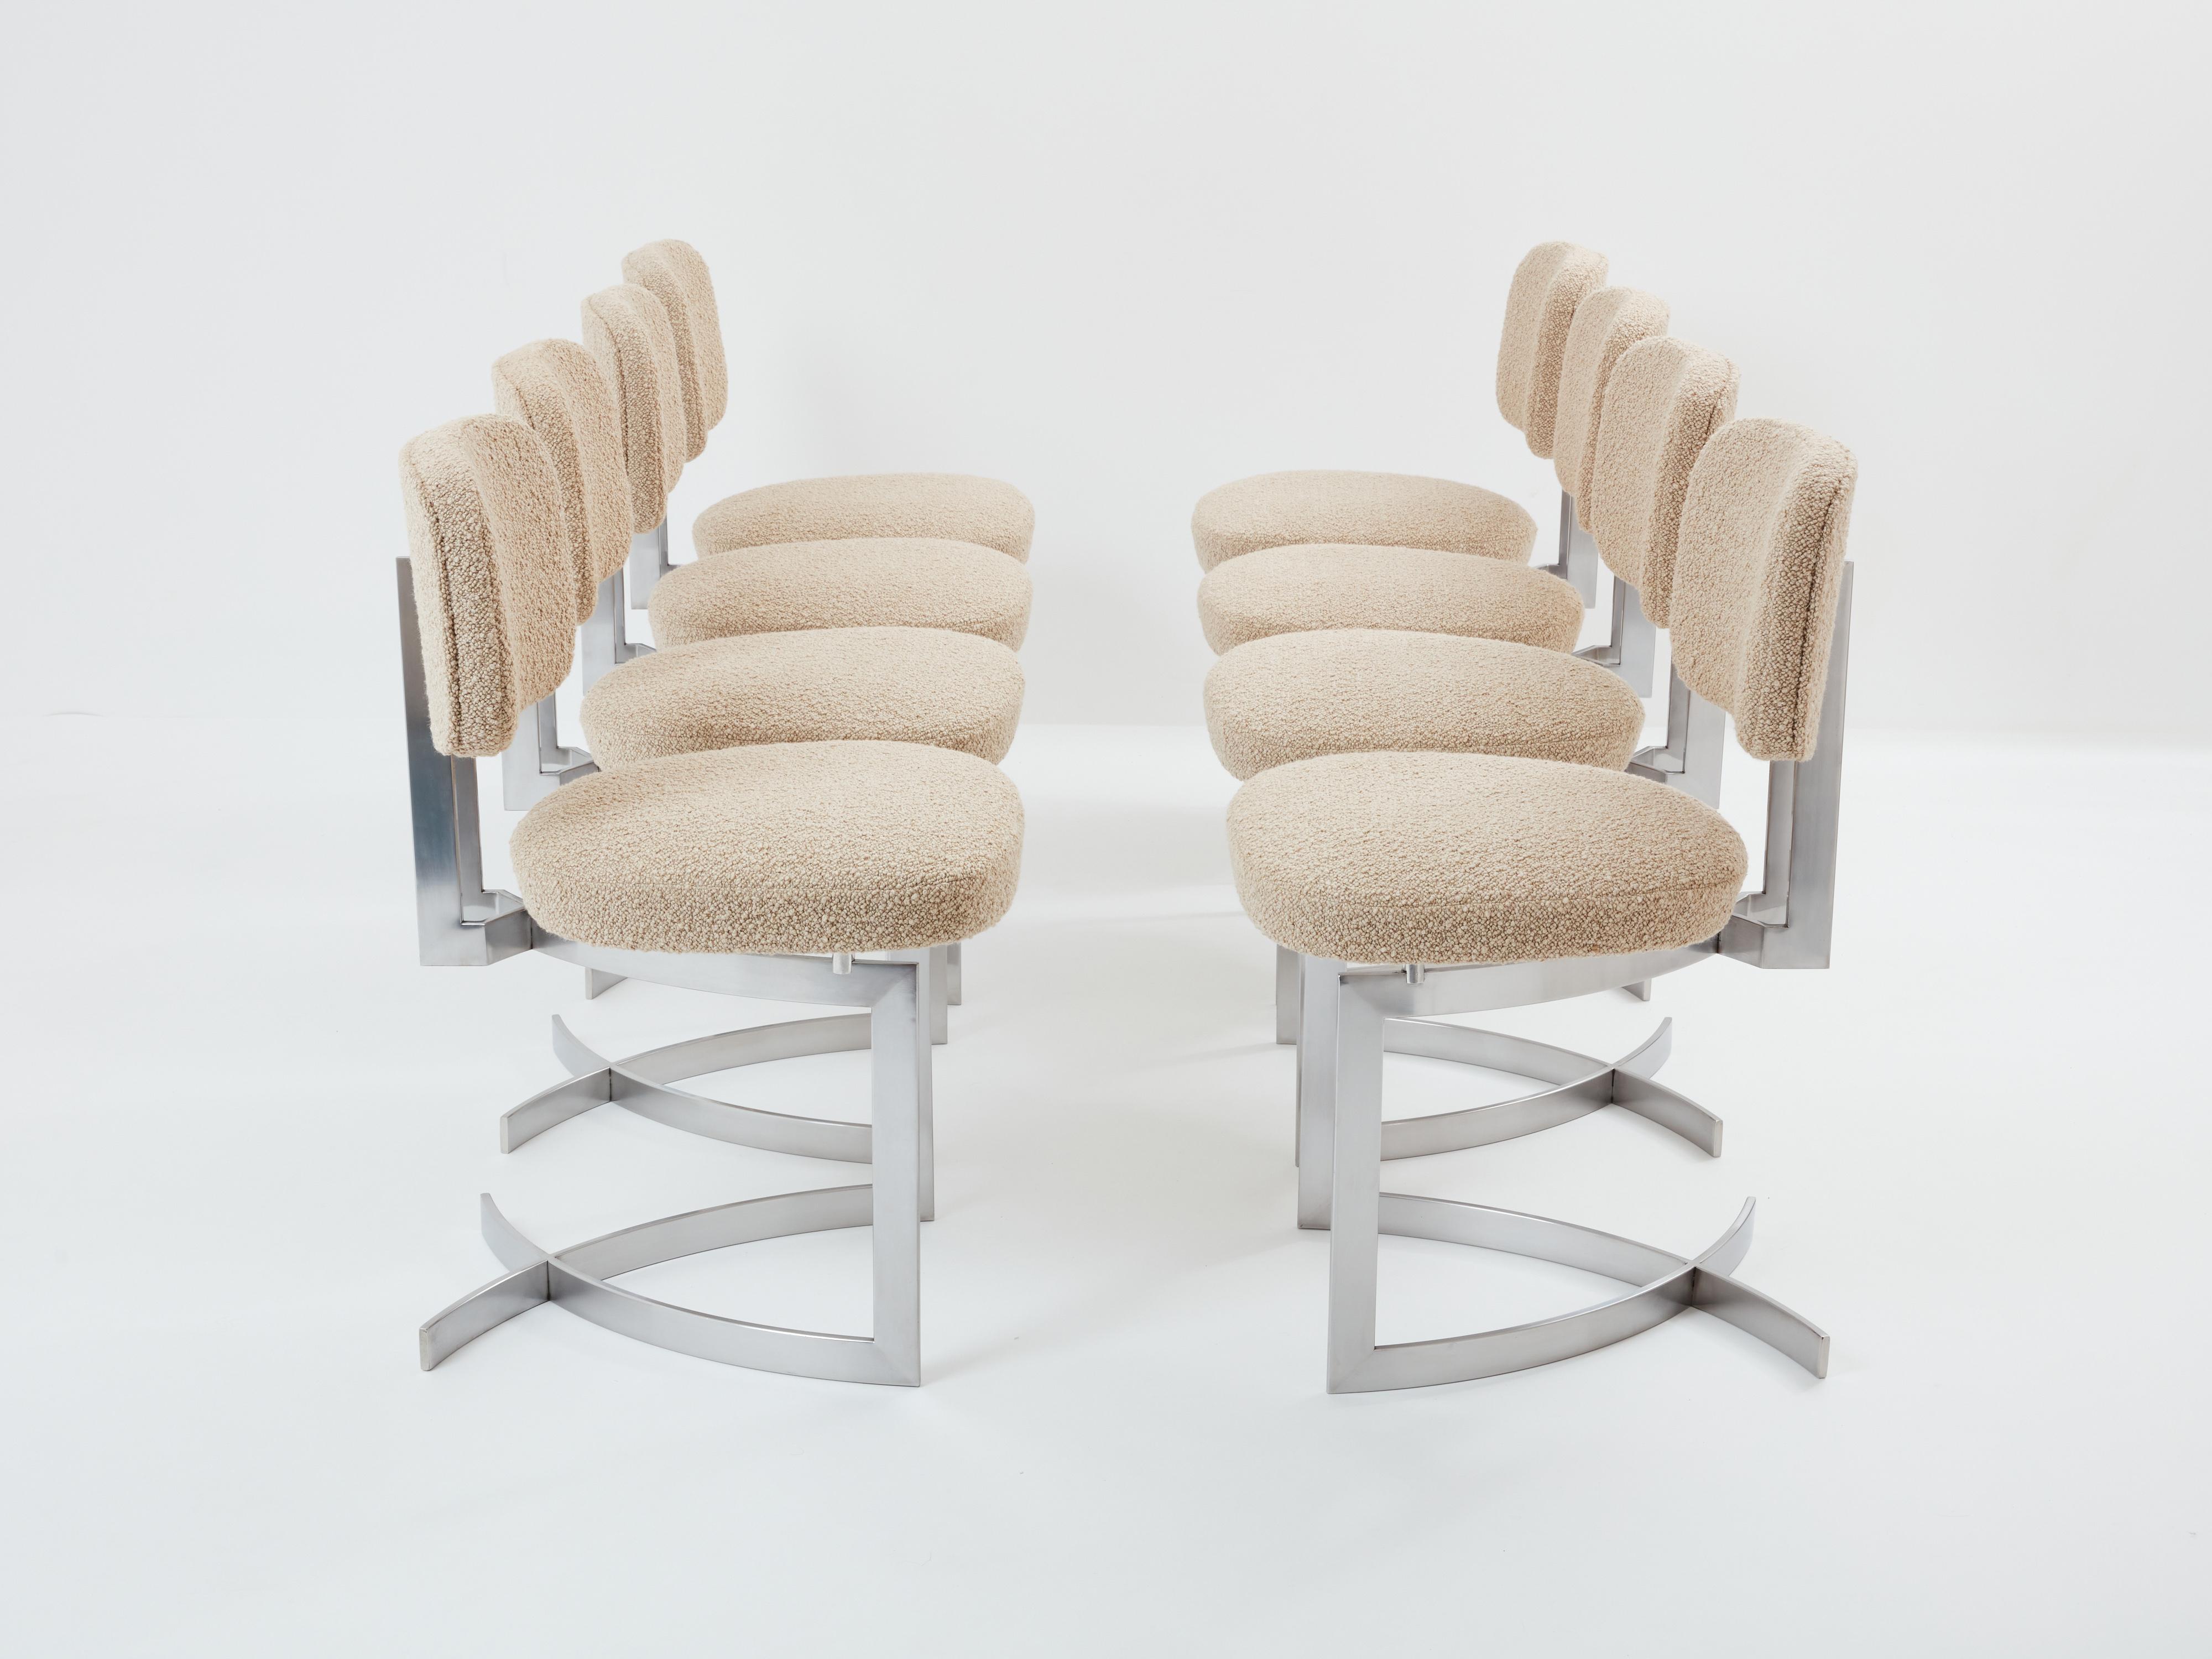 This set of eight chairs, crafted from stainless steel, was designed by the French designer Paul Legeard in the early 1970s. The geometric structure, composed of curved steel blades, supports the seat and back cushions, both reupholstered with a